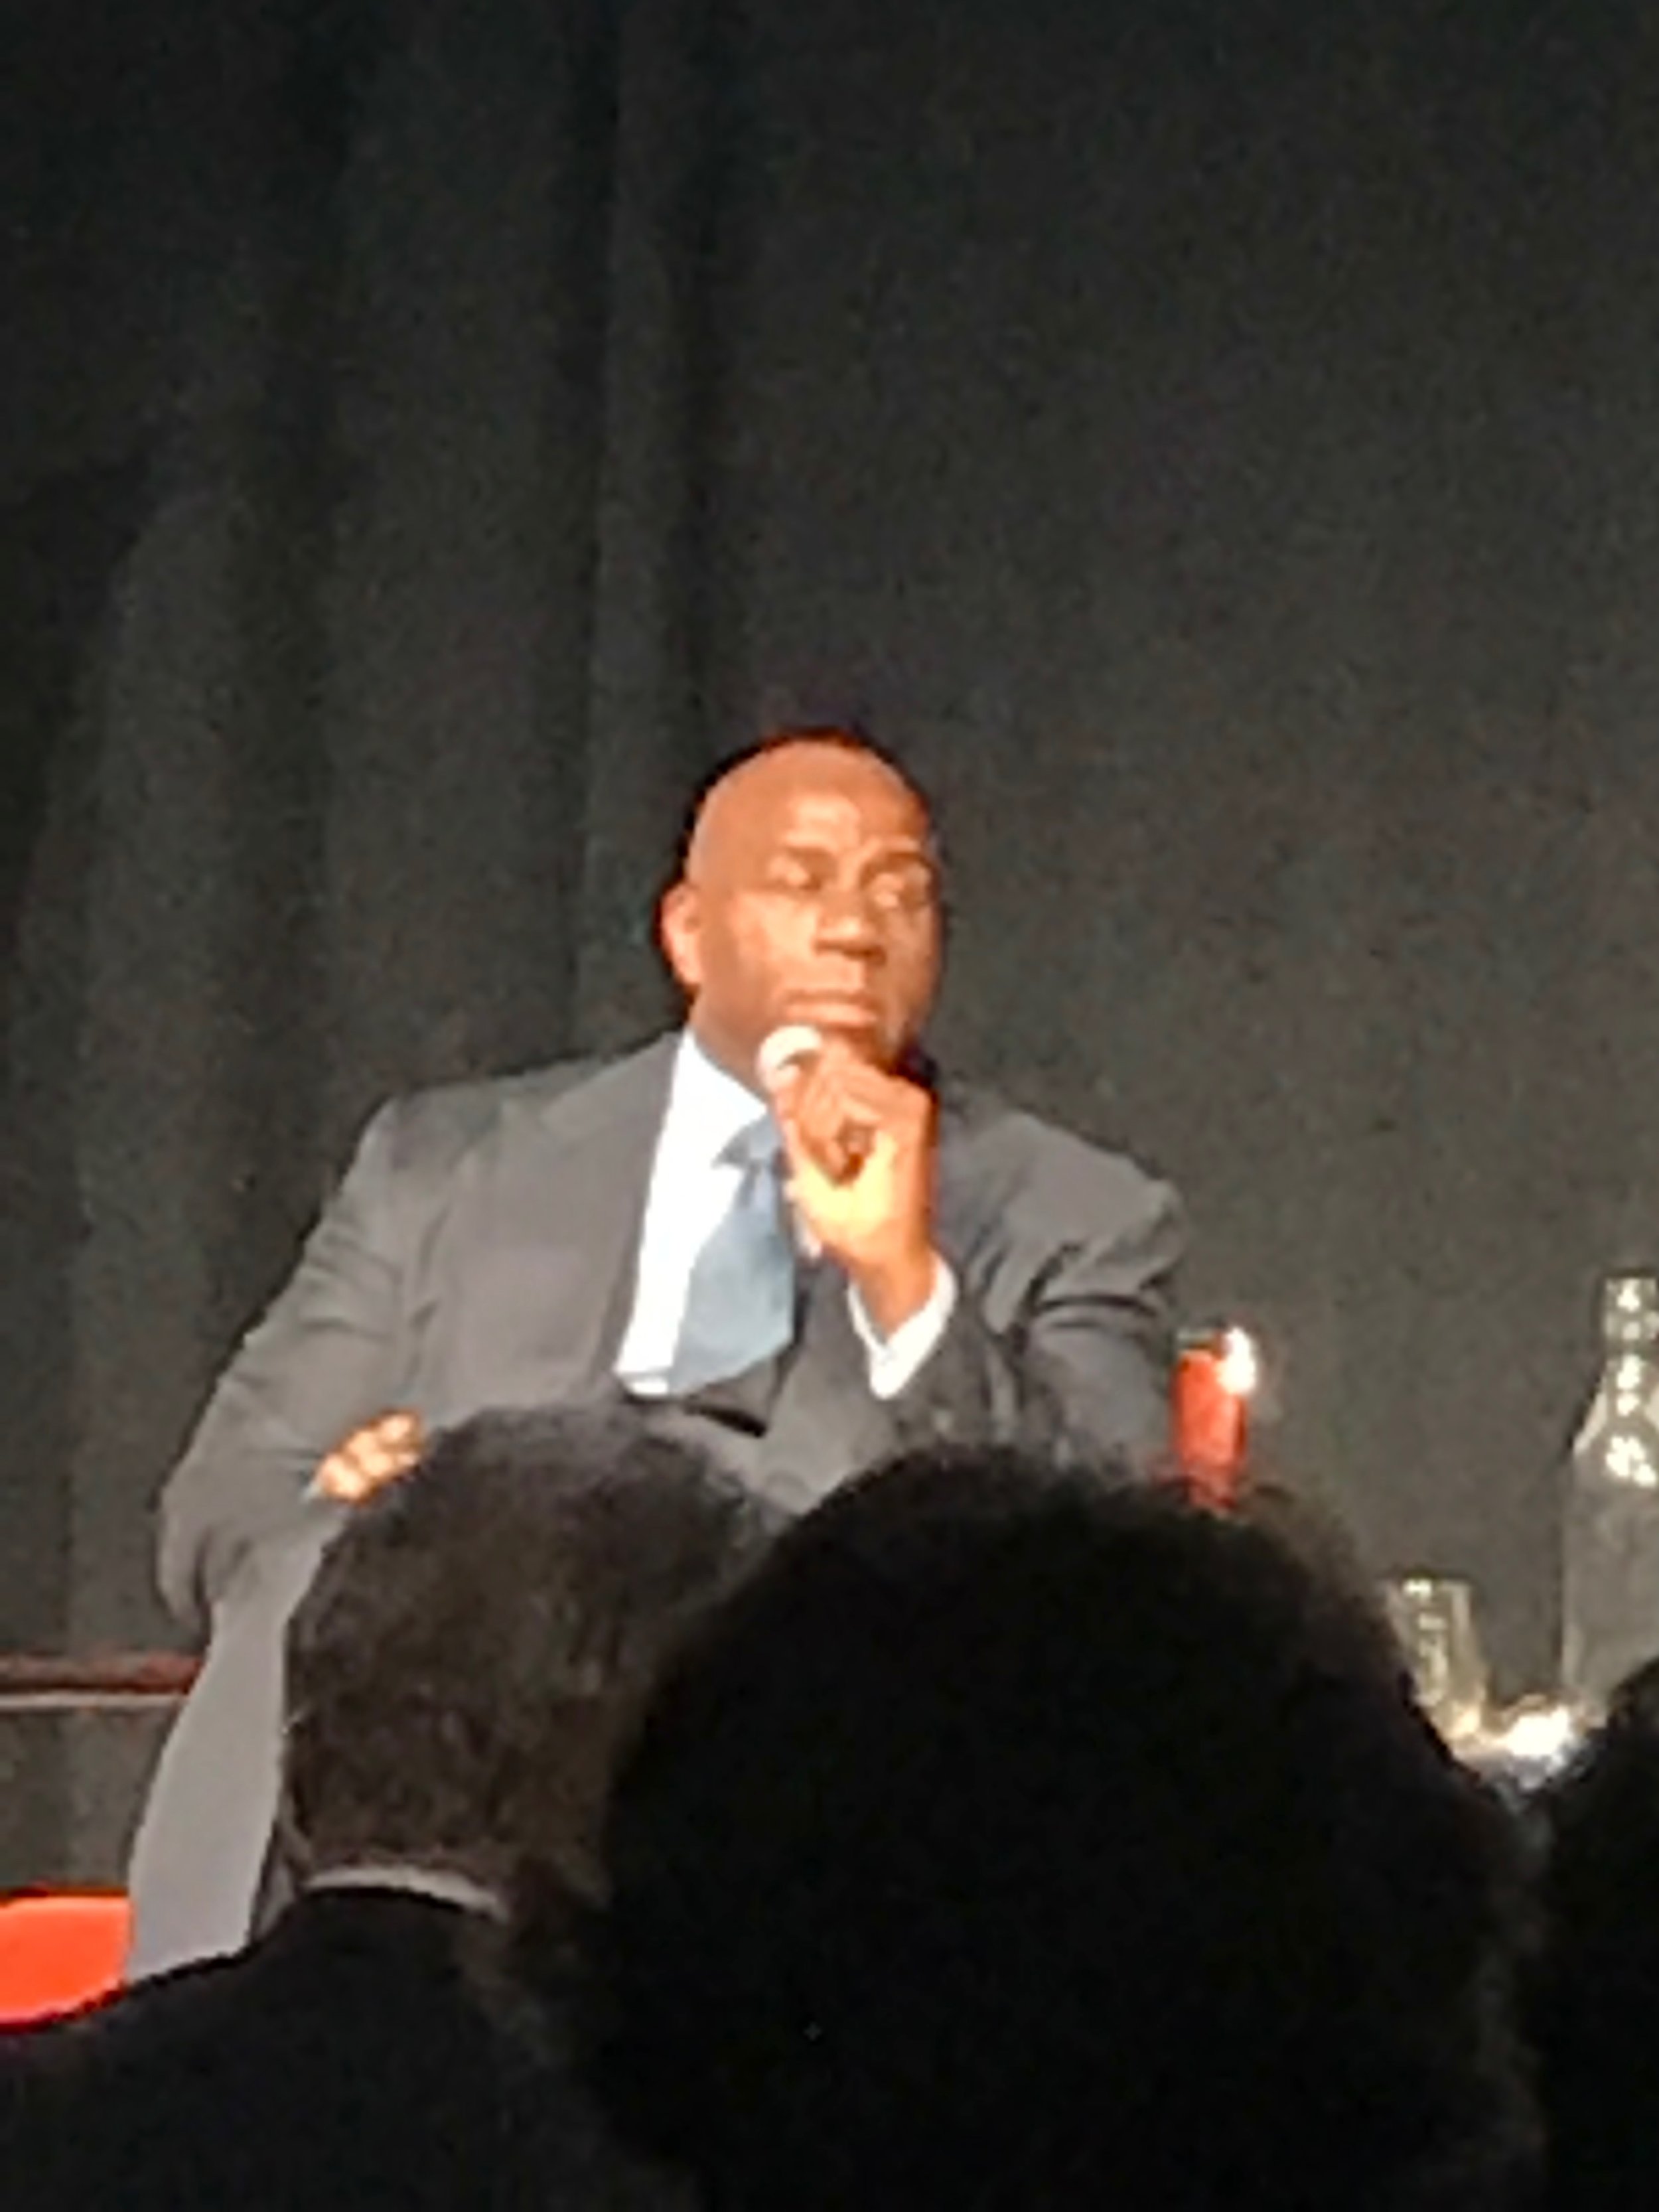 At the NBA Cares event in Los Angeles, Magic Johnson was a surprise guest speaker and quite dynamic. This event was hosted by Kaiser Permanente and NBA Cares.